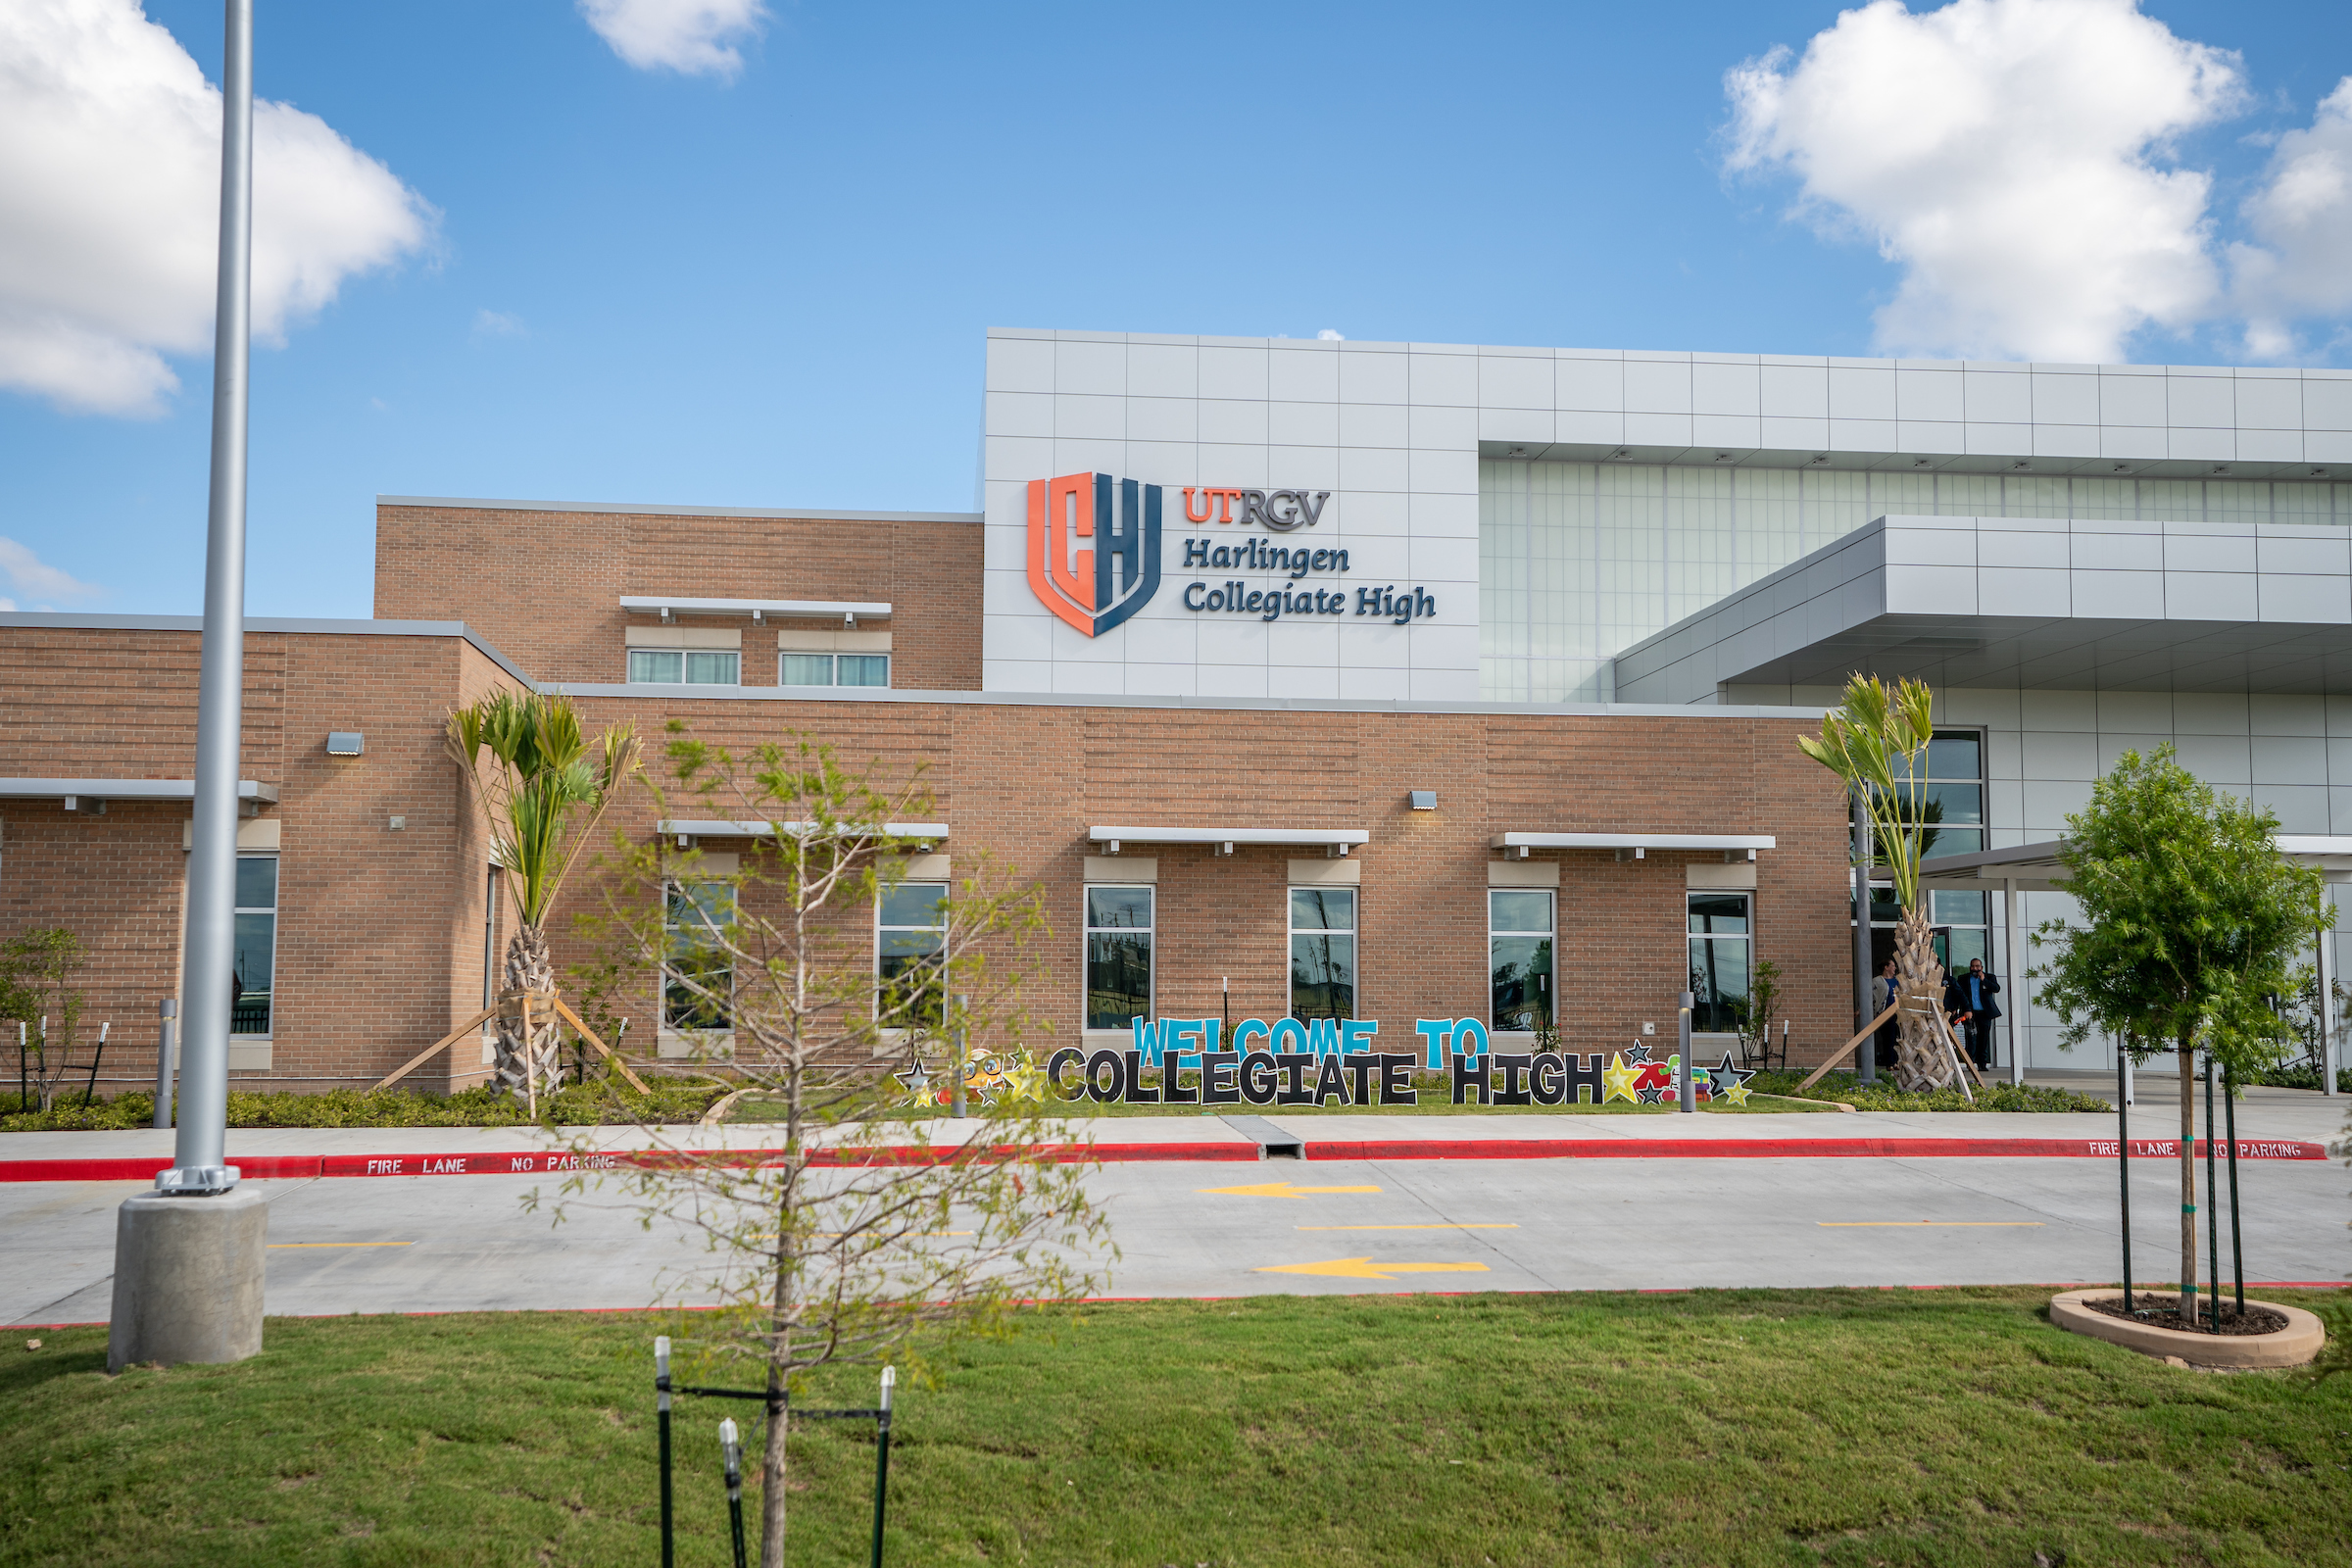 Guy Bailey says UTRGV high school is a “New model for the United States.”